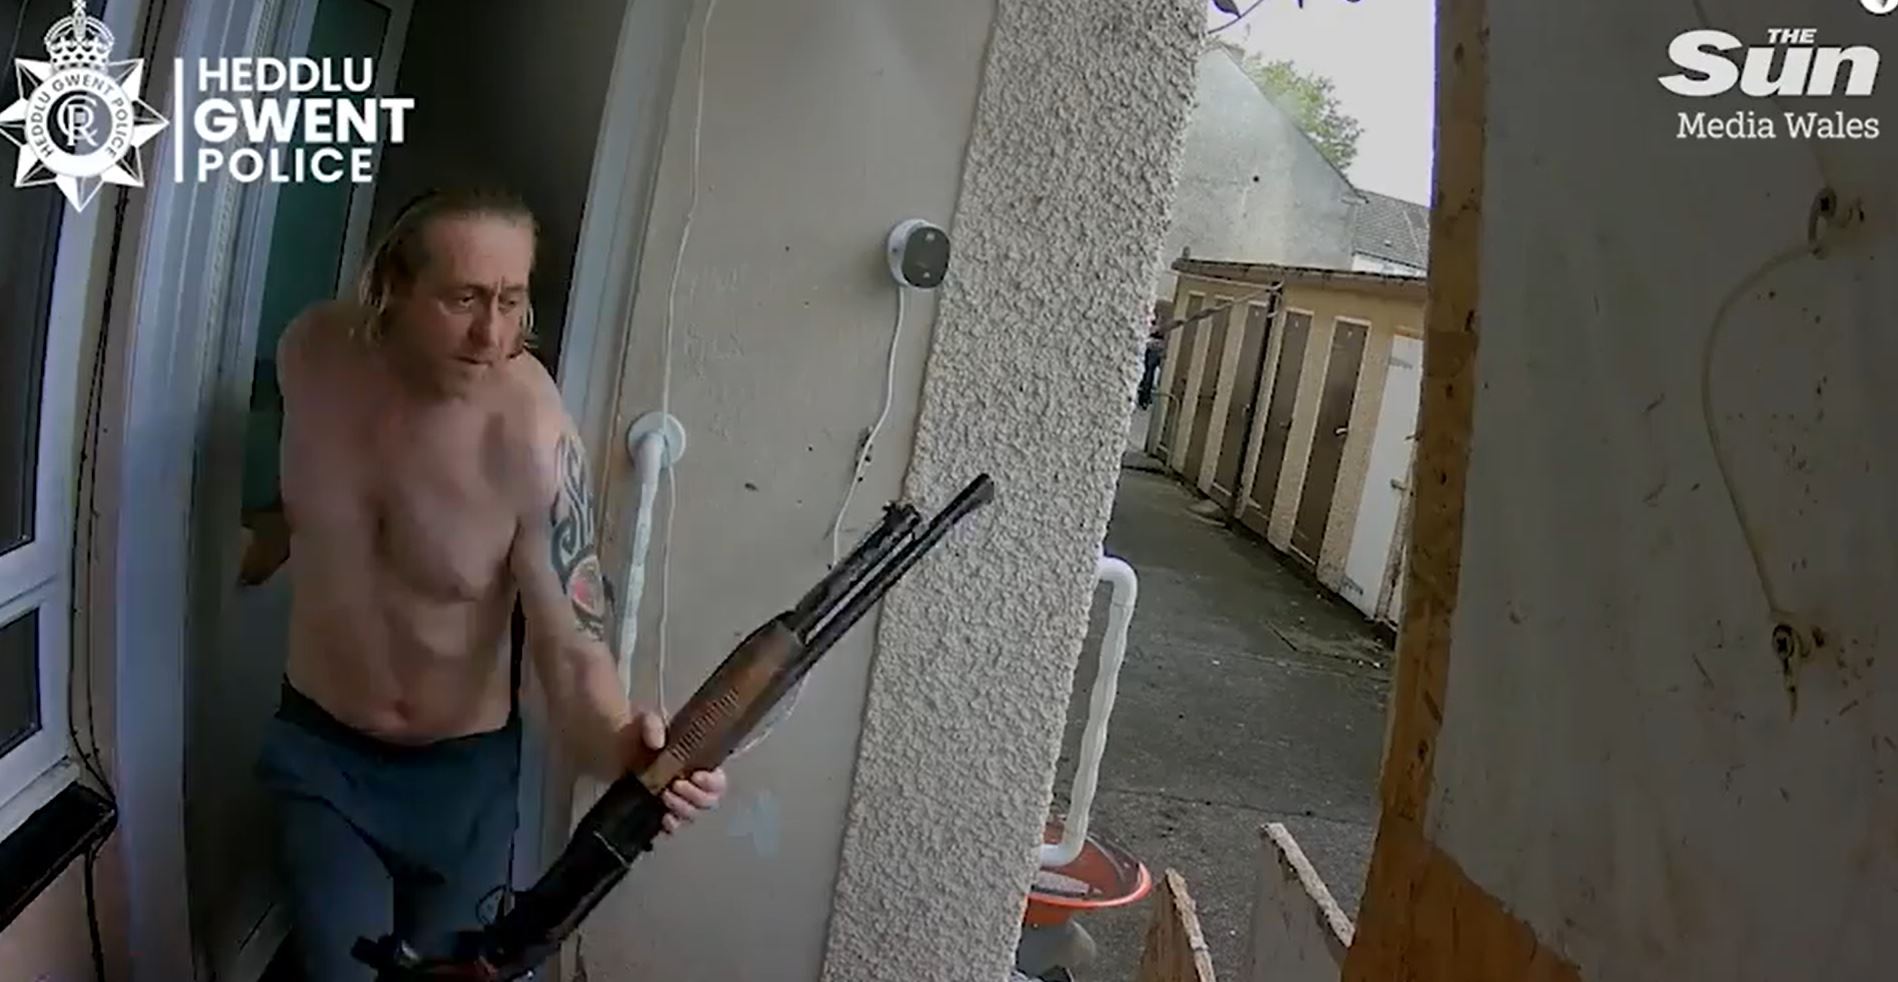 Shocking moment shirtless man charges his neighbour with SHOTGUN in row over ‘loud music’ before he’s cornered by cops